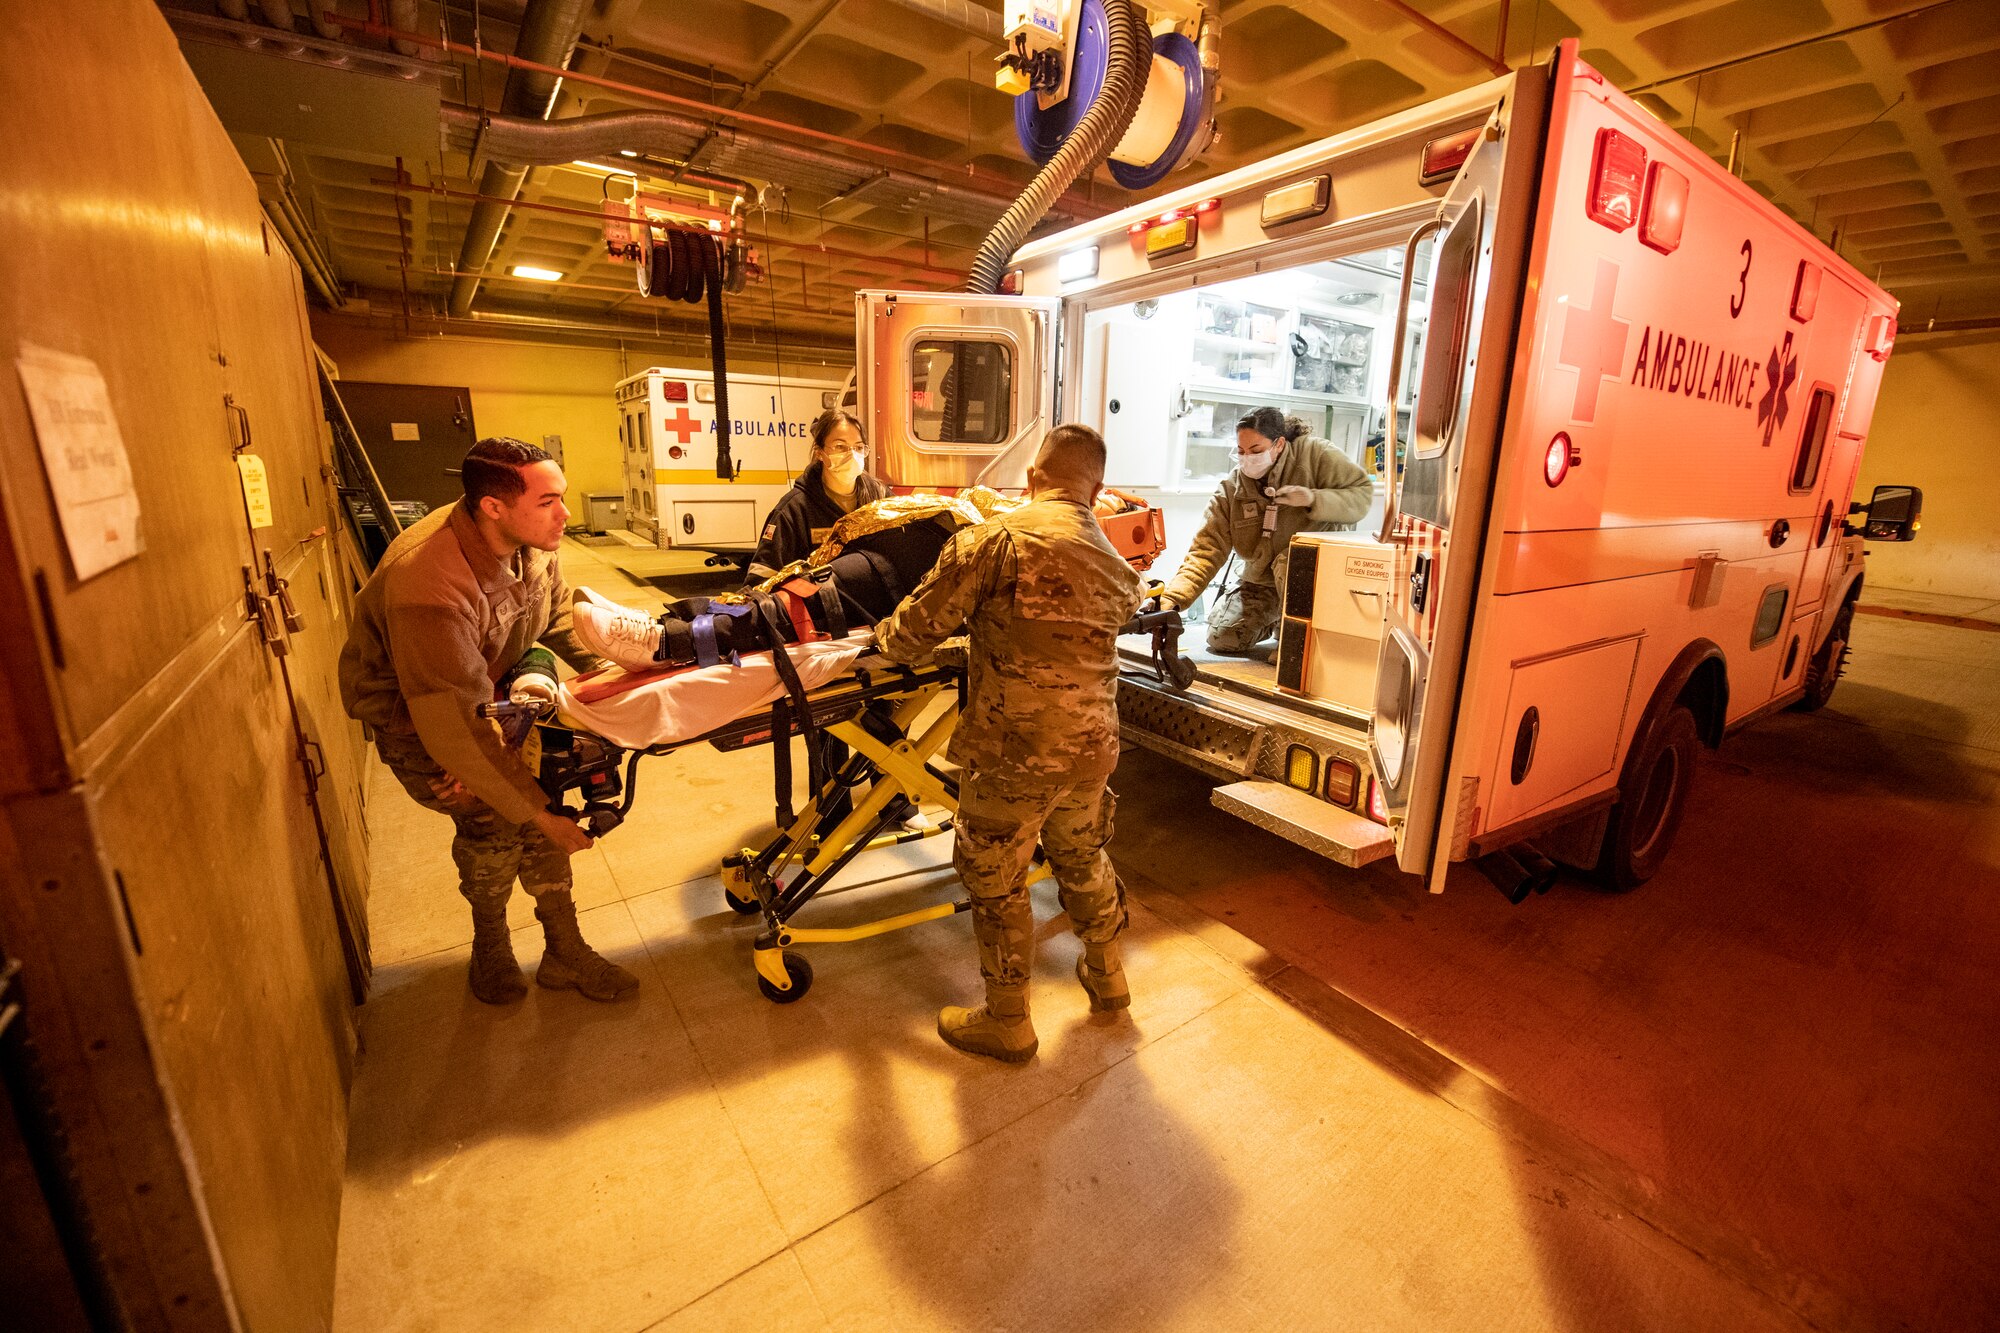 U.S. Air Force Airmen from the 51st Medical Group (MDG) unload Kwang Pil Pak, 51st MDG warrior medicine clinic administrator and simulated trauma patient, from the back of an ambulance at the urgent care facility on Osan Air Base, Republic of Korea, Feb. 28, 2023.  The training event tested the Airmen’s ability to quickly transport patients from the field to the urgent care facility. (U.S. Air Force photo by Airman 1st Class Aaron Edwards)